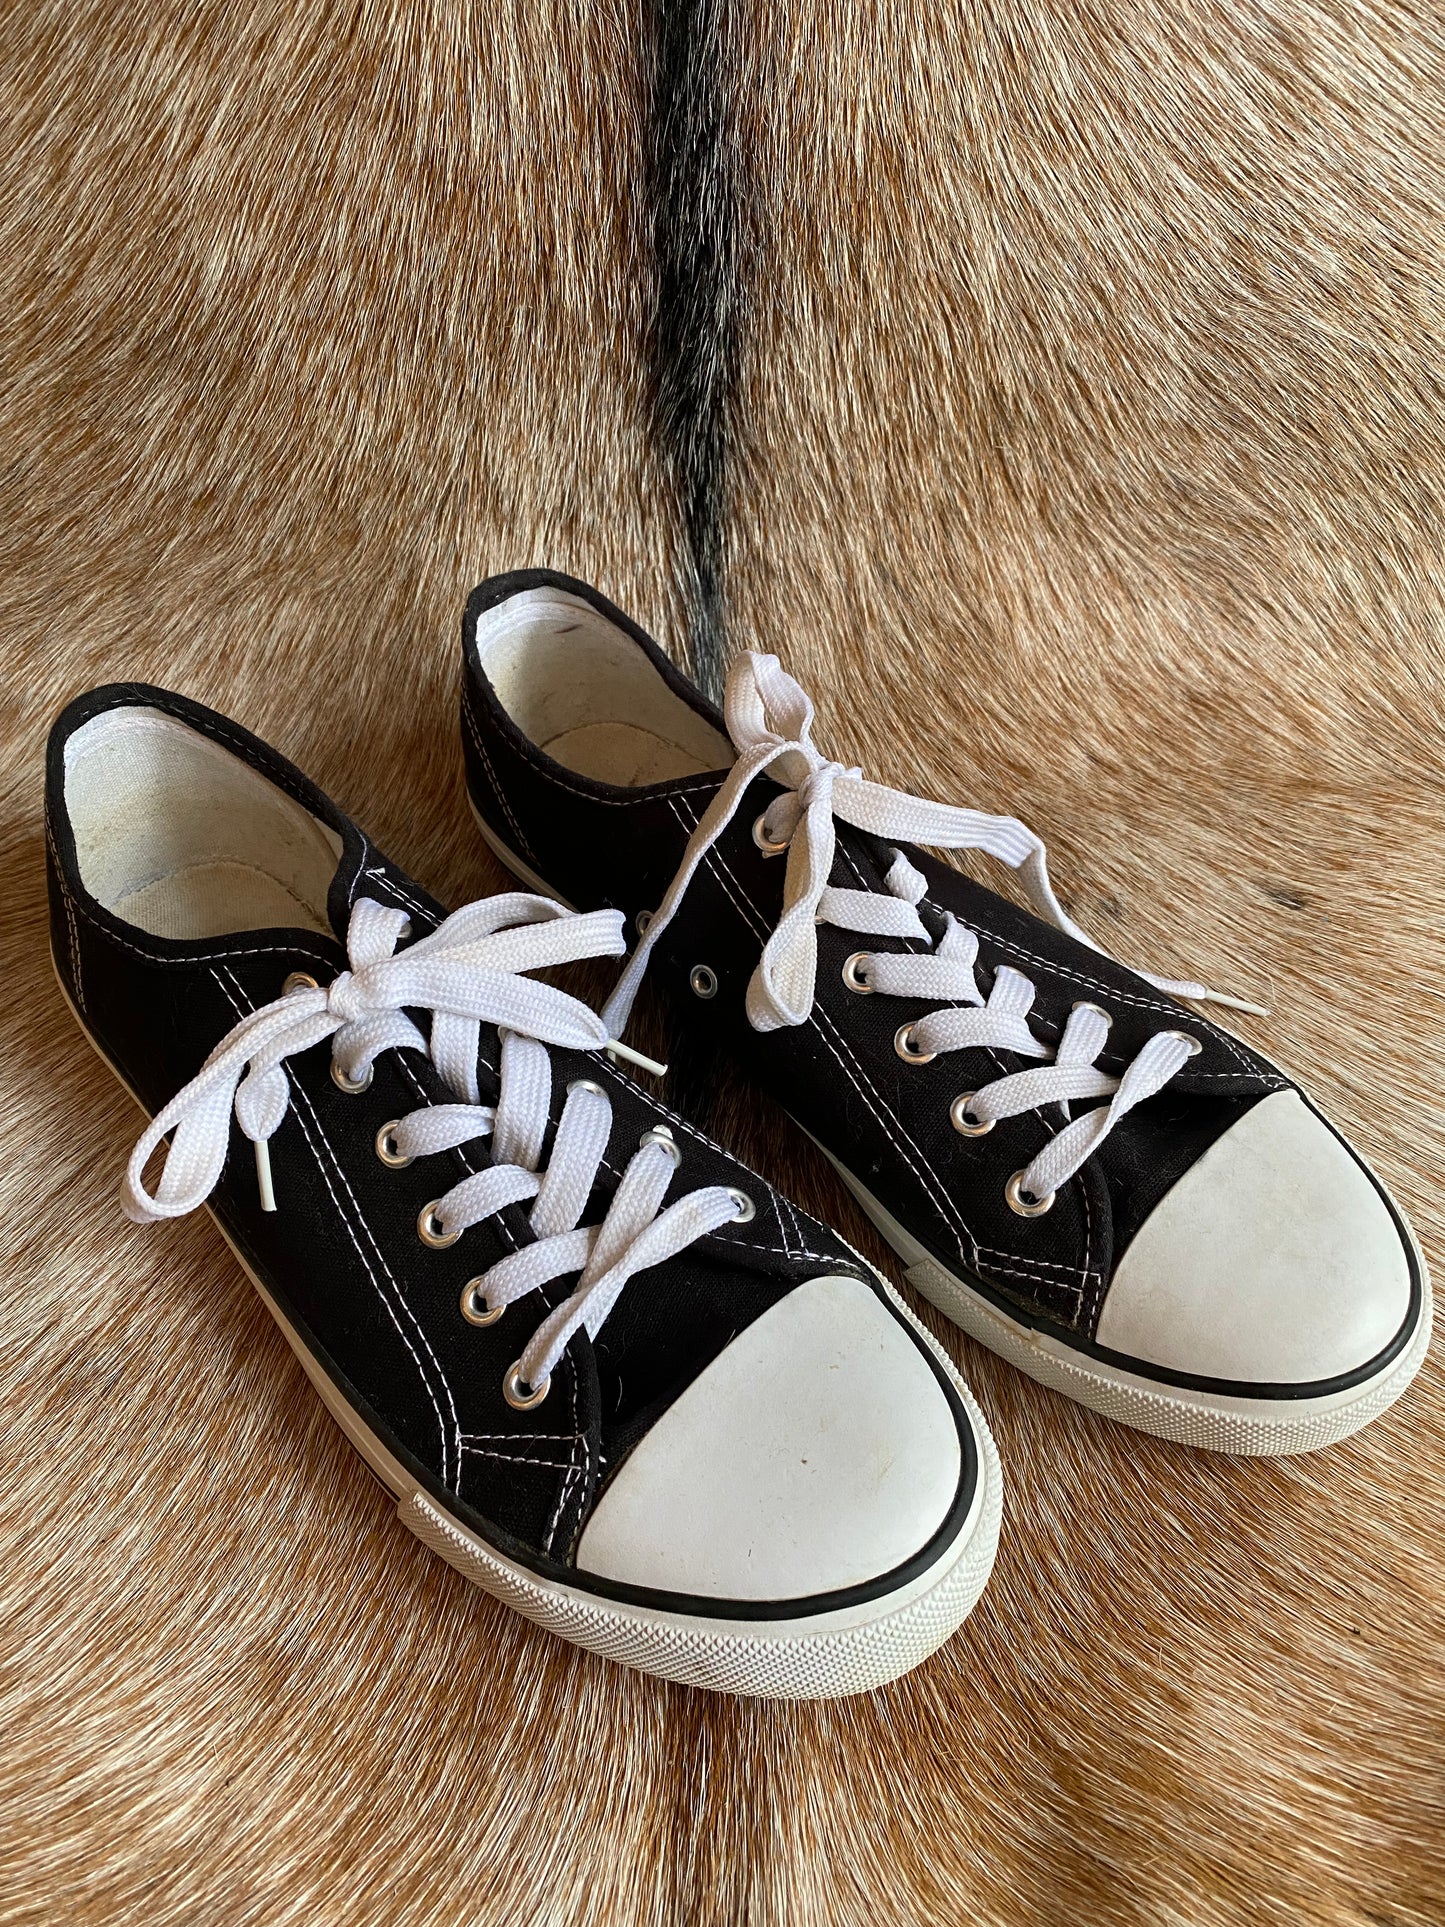 Classic Black & White Converse Low Top Sneakers